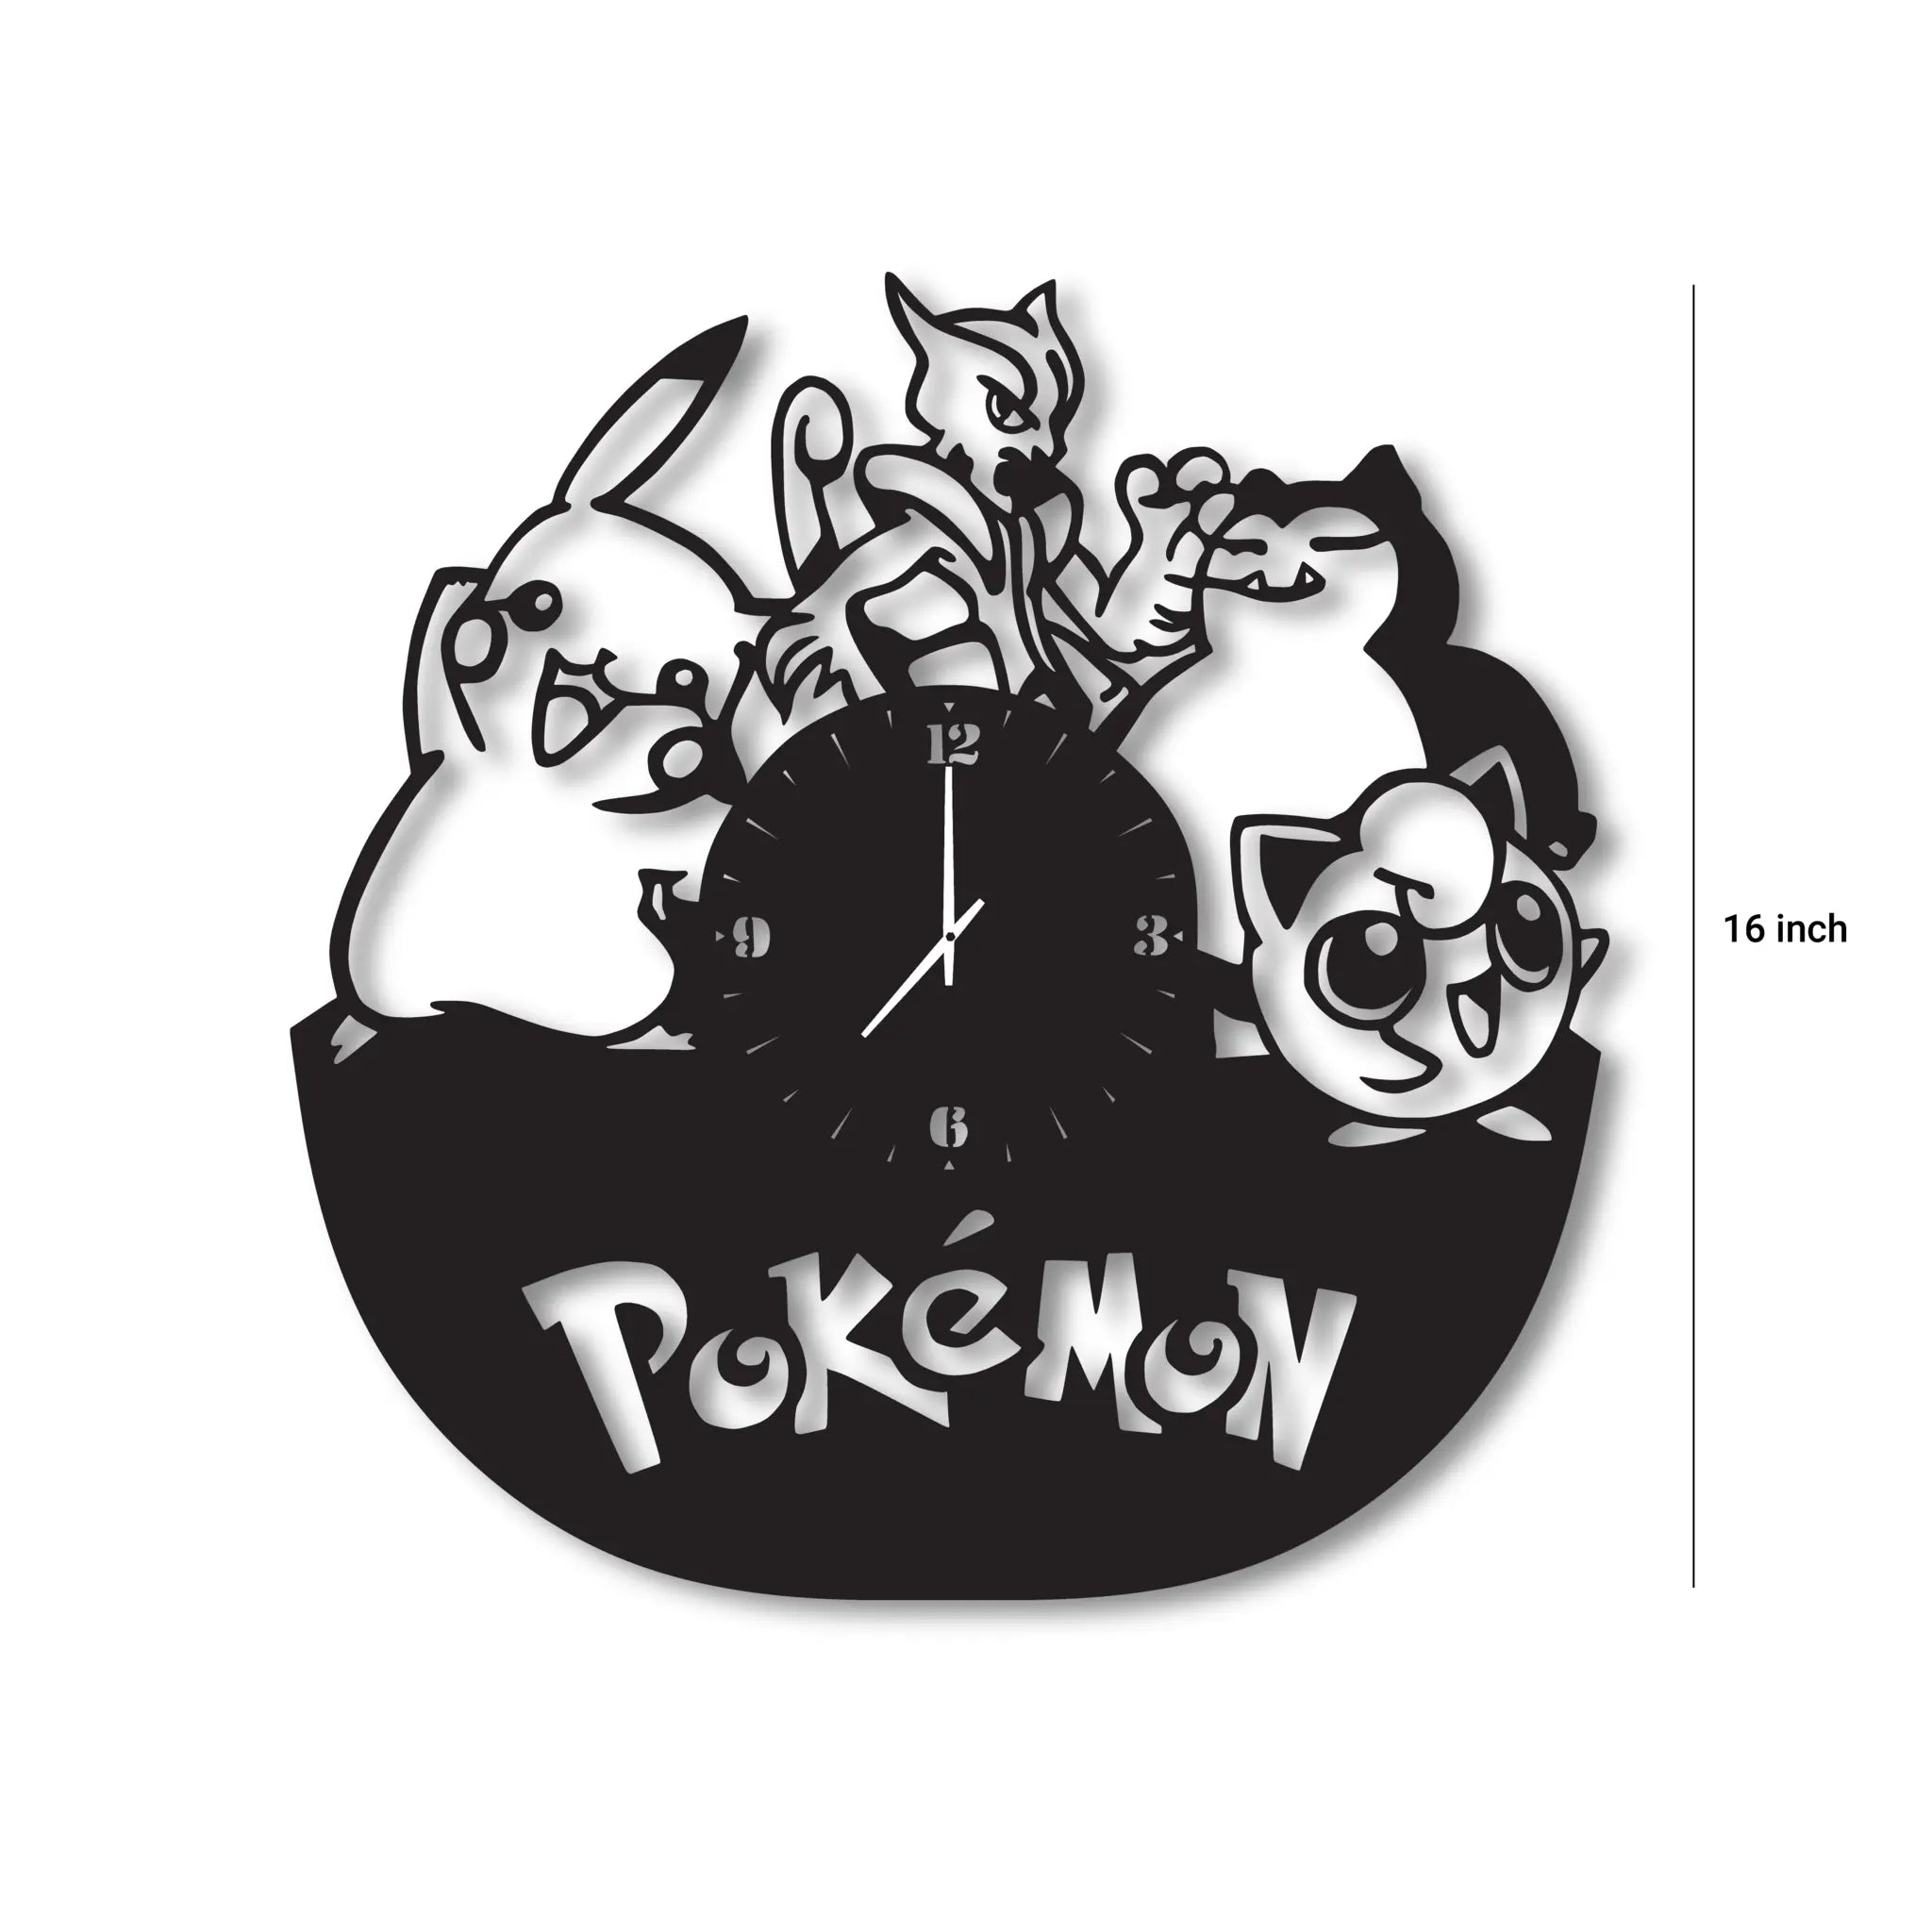 Pokémon Metal Record: Contemporary Clock Anime Characters with Original Art for Kids' Room Wall Decor Present for Son's Birthday